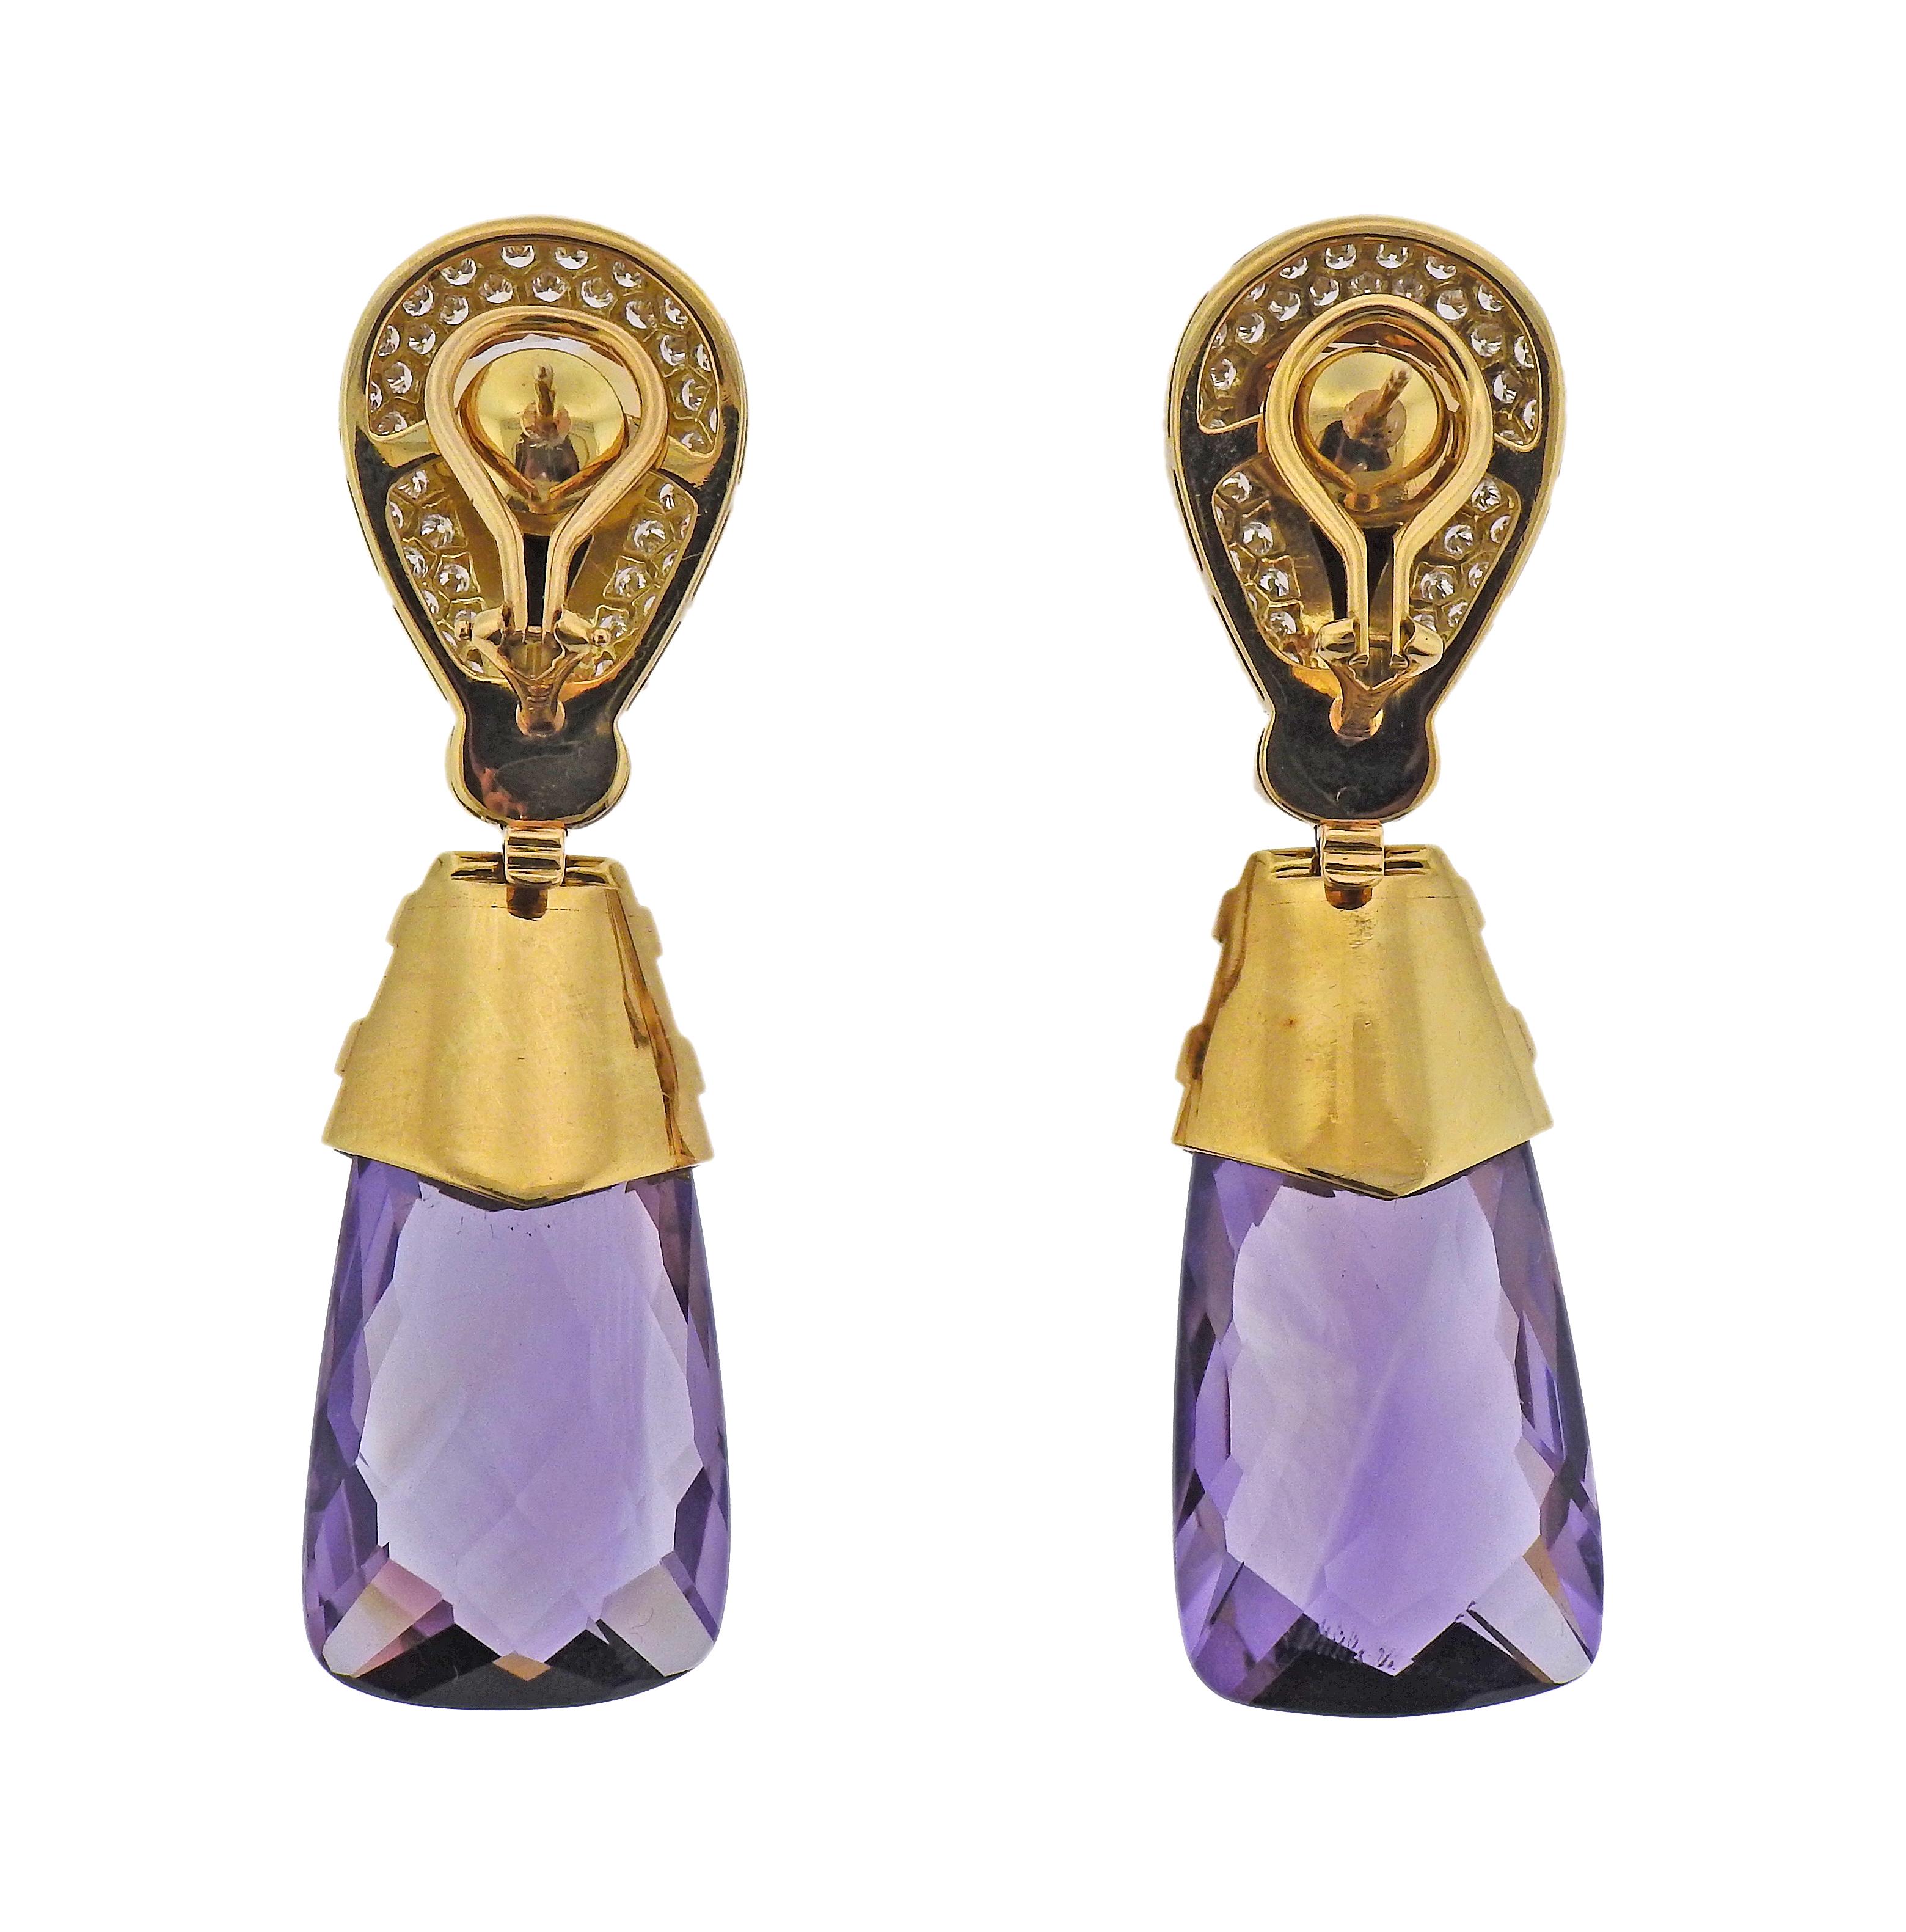 Pair of 18k gold cocktail earrings, with faceted amethysts, faceted and cabochon citrines and approx. 1.00ctw in diamonds. Earrings measure 2 3/8